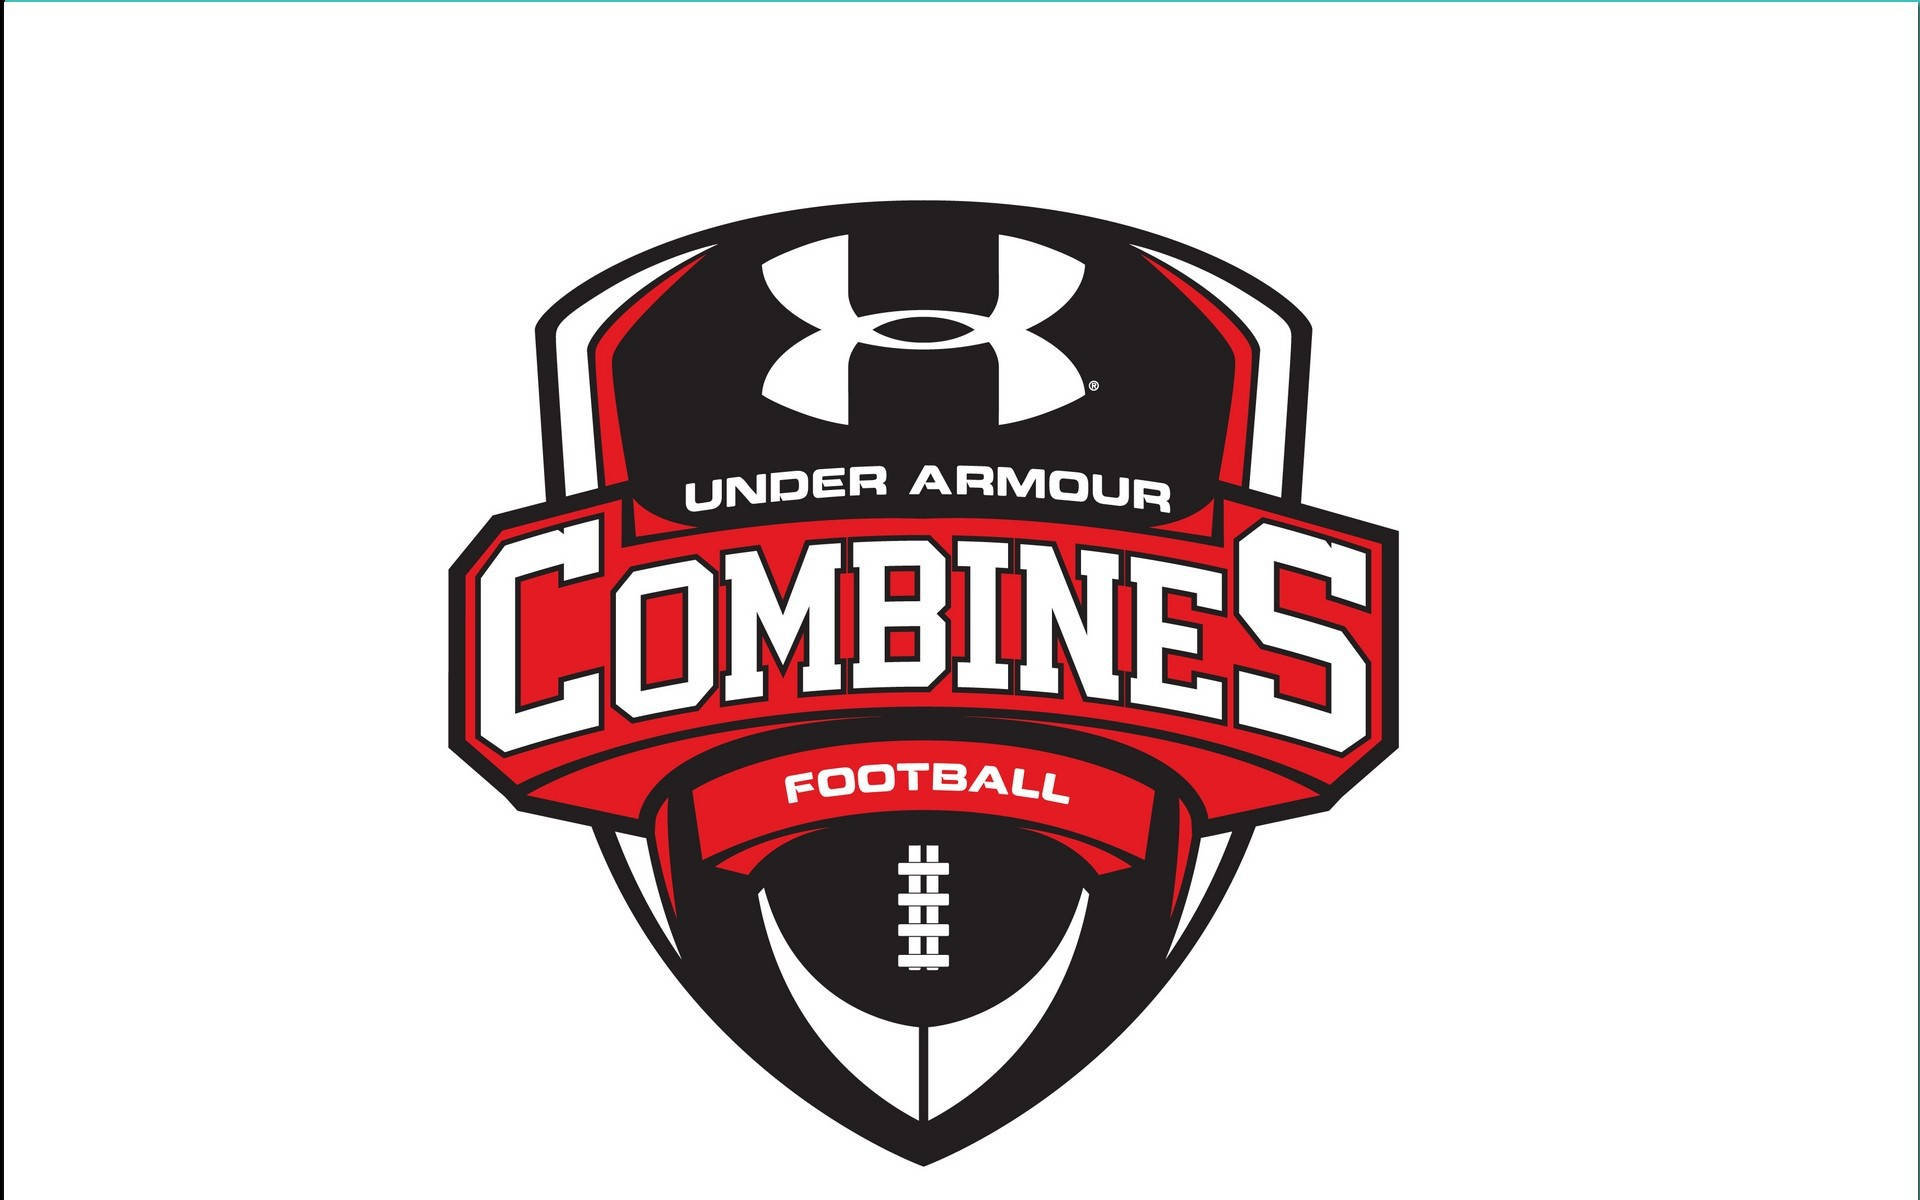 Under Armour Combines Football Background